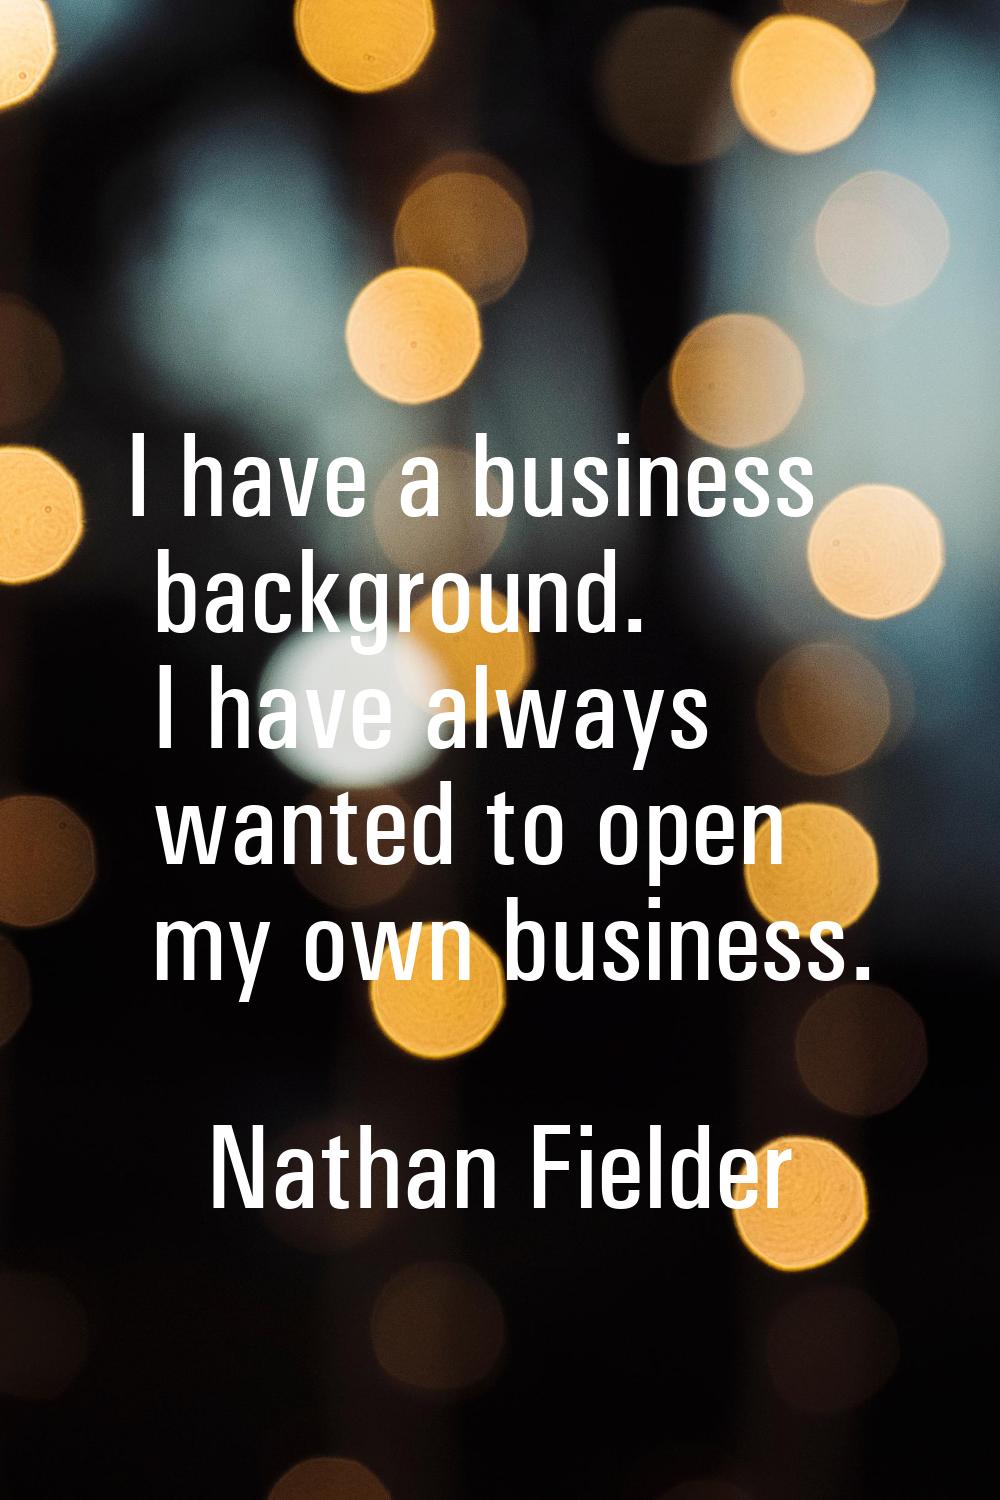 I have a business background. I have always wanted to open my own business.